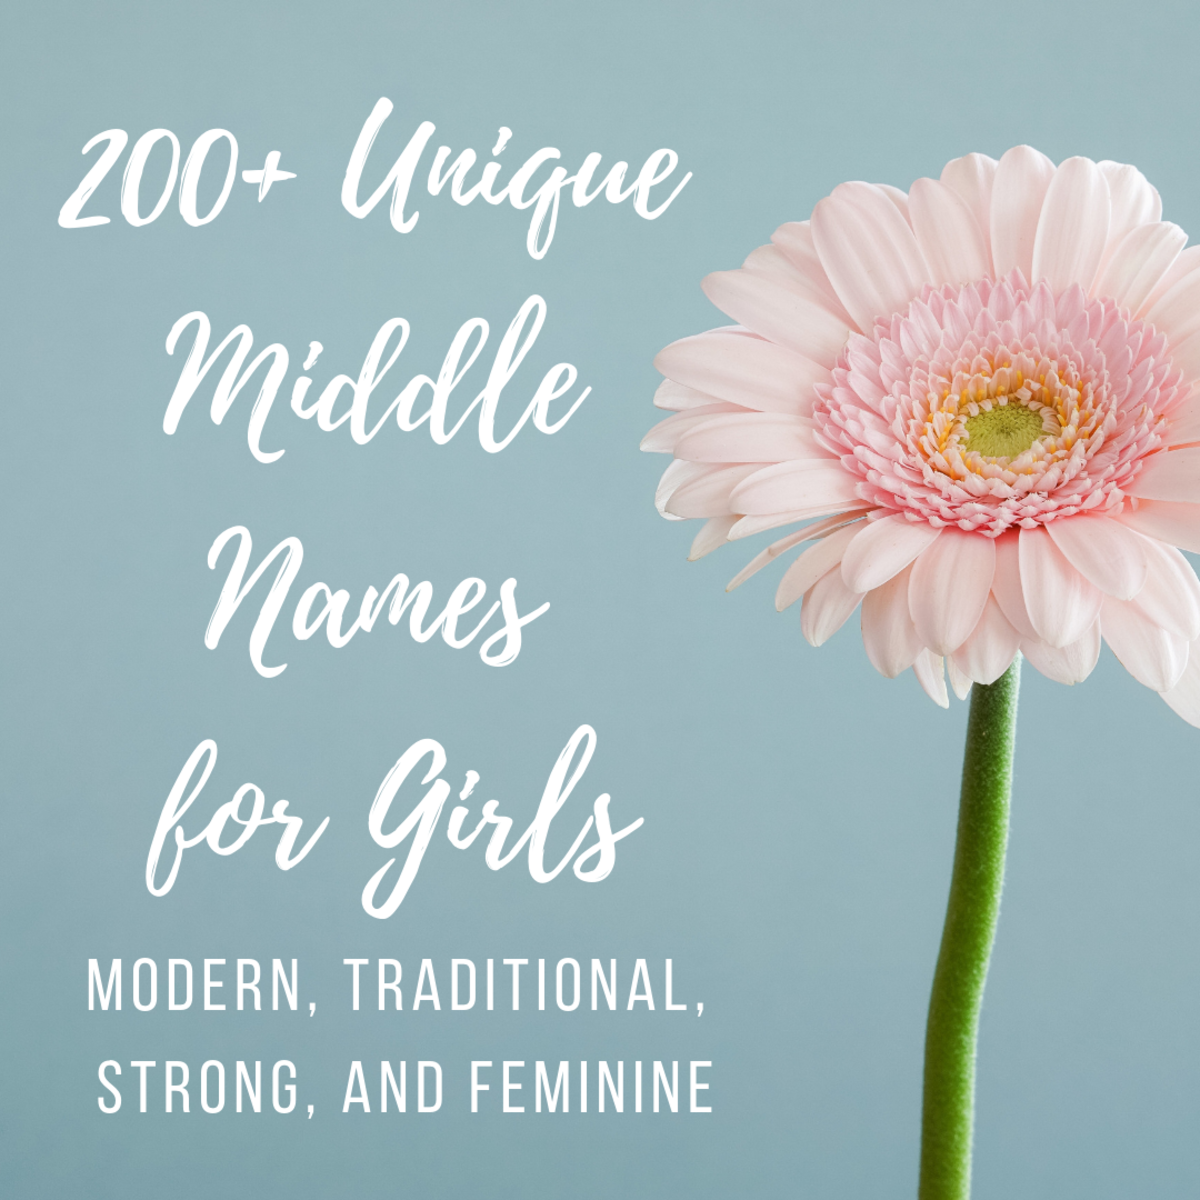 200+ Unique and Meaningful Middle Names for Girls